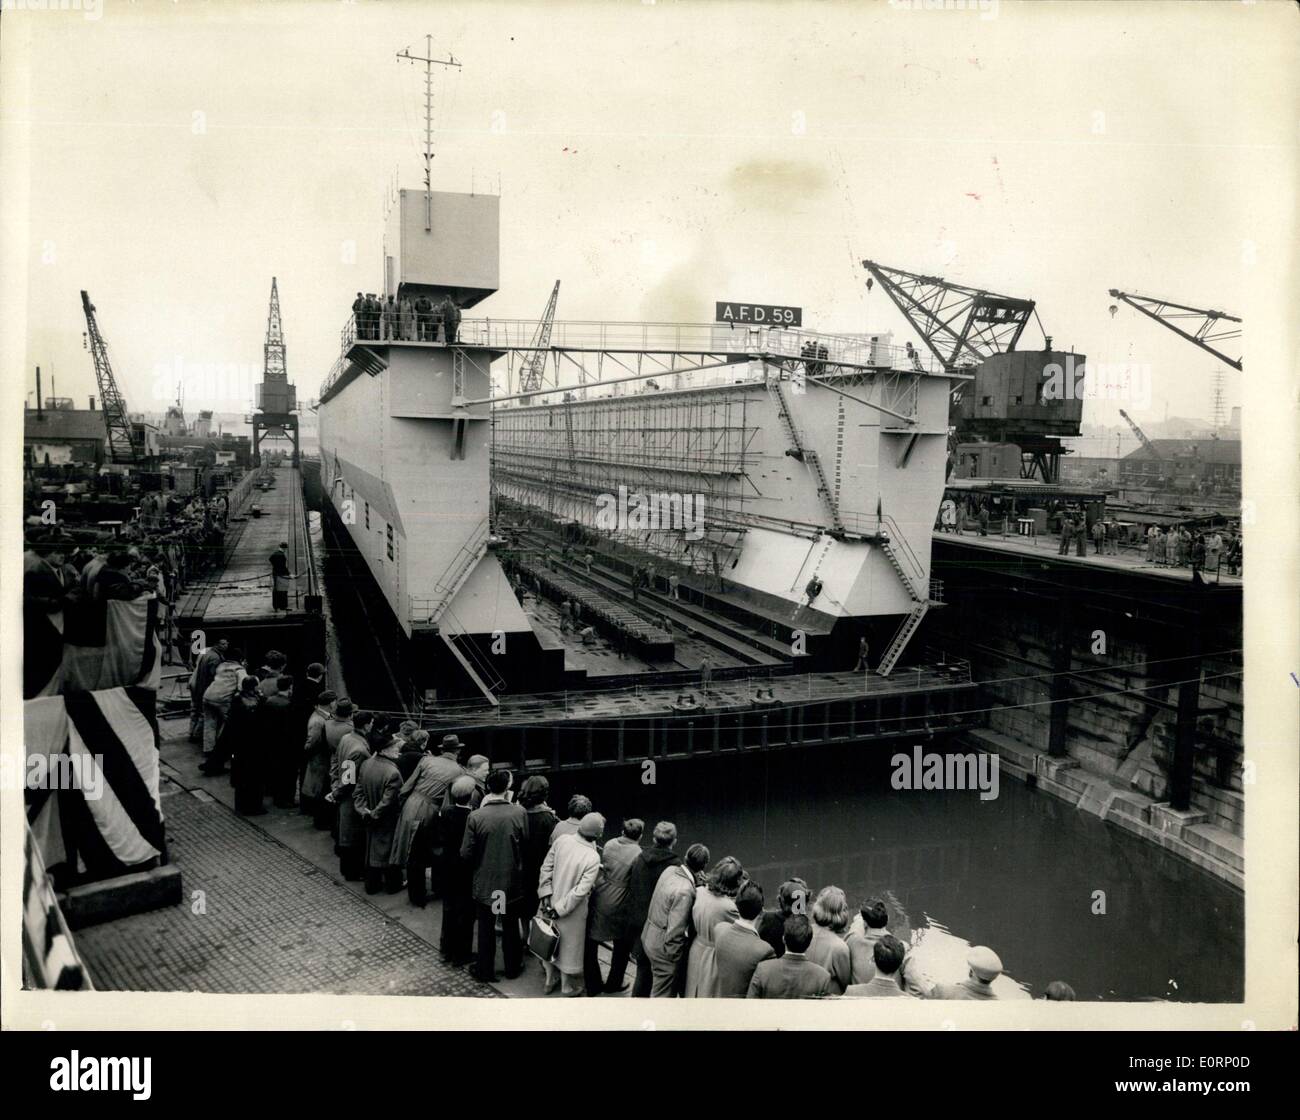 Mar. 31, 1960 - ''Launching'' Of New Admiralty Dock: Lady Carrington, wife of the First Lord of the Admiralty, today performed the ceremony which started the ''flooding-up and ''launching'' of the Royal Navy's latest floating dock at H.M. Dockyard, Portsmouth. The dock was laid down in January last year and will be used in the fitting out of H.M.S. Dreadnought, the first British nuclear submarine, which is being built at Barrow-in-Furness Stock Photo